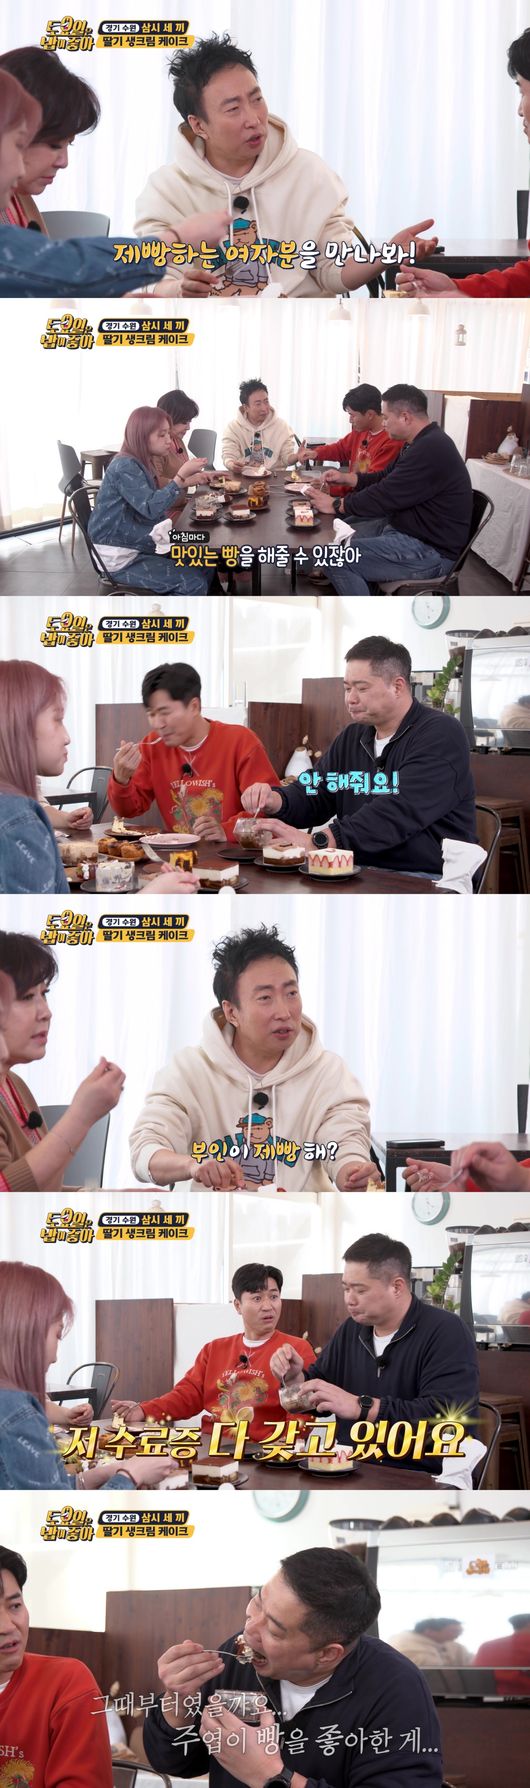 Hyun Joo-yup has revealed his wifes ability to be wrapped in veils.The members who returned to Kim Jong-min and made a complete body started a new trip to Suwon on the Tcast E channel Saturday is good broadcast on the 9th.Hyun Joo-yup starts a special conversation with the president by watching the certificate displayed on the wall at a cafe famous for its cream cake.I asked if I had come out of the prestigious bakery academy and said, Why did not you do Grand Diploma?Kim Jong-min wondered about the unfamiliar word what is it like, what is it to eat? And Hyun Joo-yup poured out unusual common sense, saying, When you finish the highest level course, there is a diploma called Grand Diploma.Park Myeong-su told Kim Jong-min, who was interested, Meet the baker, the woman, and can you make delicious bread every morning?However, Hyun Joo-yup said, I do not do it.Park Myeong-su asked Hyun Joo-yups brief answer, Does Mrs. Bug bake? And Hyun Joo-yup said, I have all that certificate, referring to his wife who finished a course at a world-class confectionery bakery school.So, Noh Sang-yeon envied Hyun Joo-yup, who had a bakers wife, saying, So Hyun Joo-yup eats bread well.Tcast E channel I like rice on Saturday broadcast capture